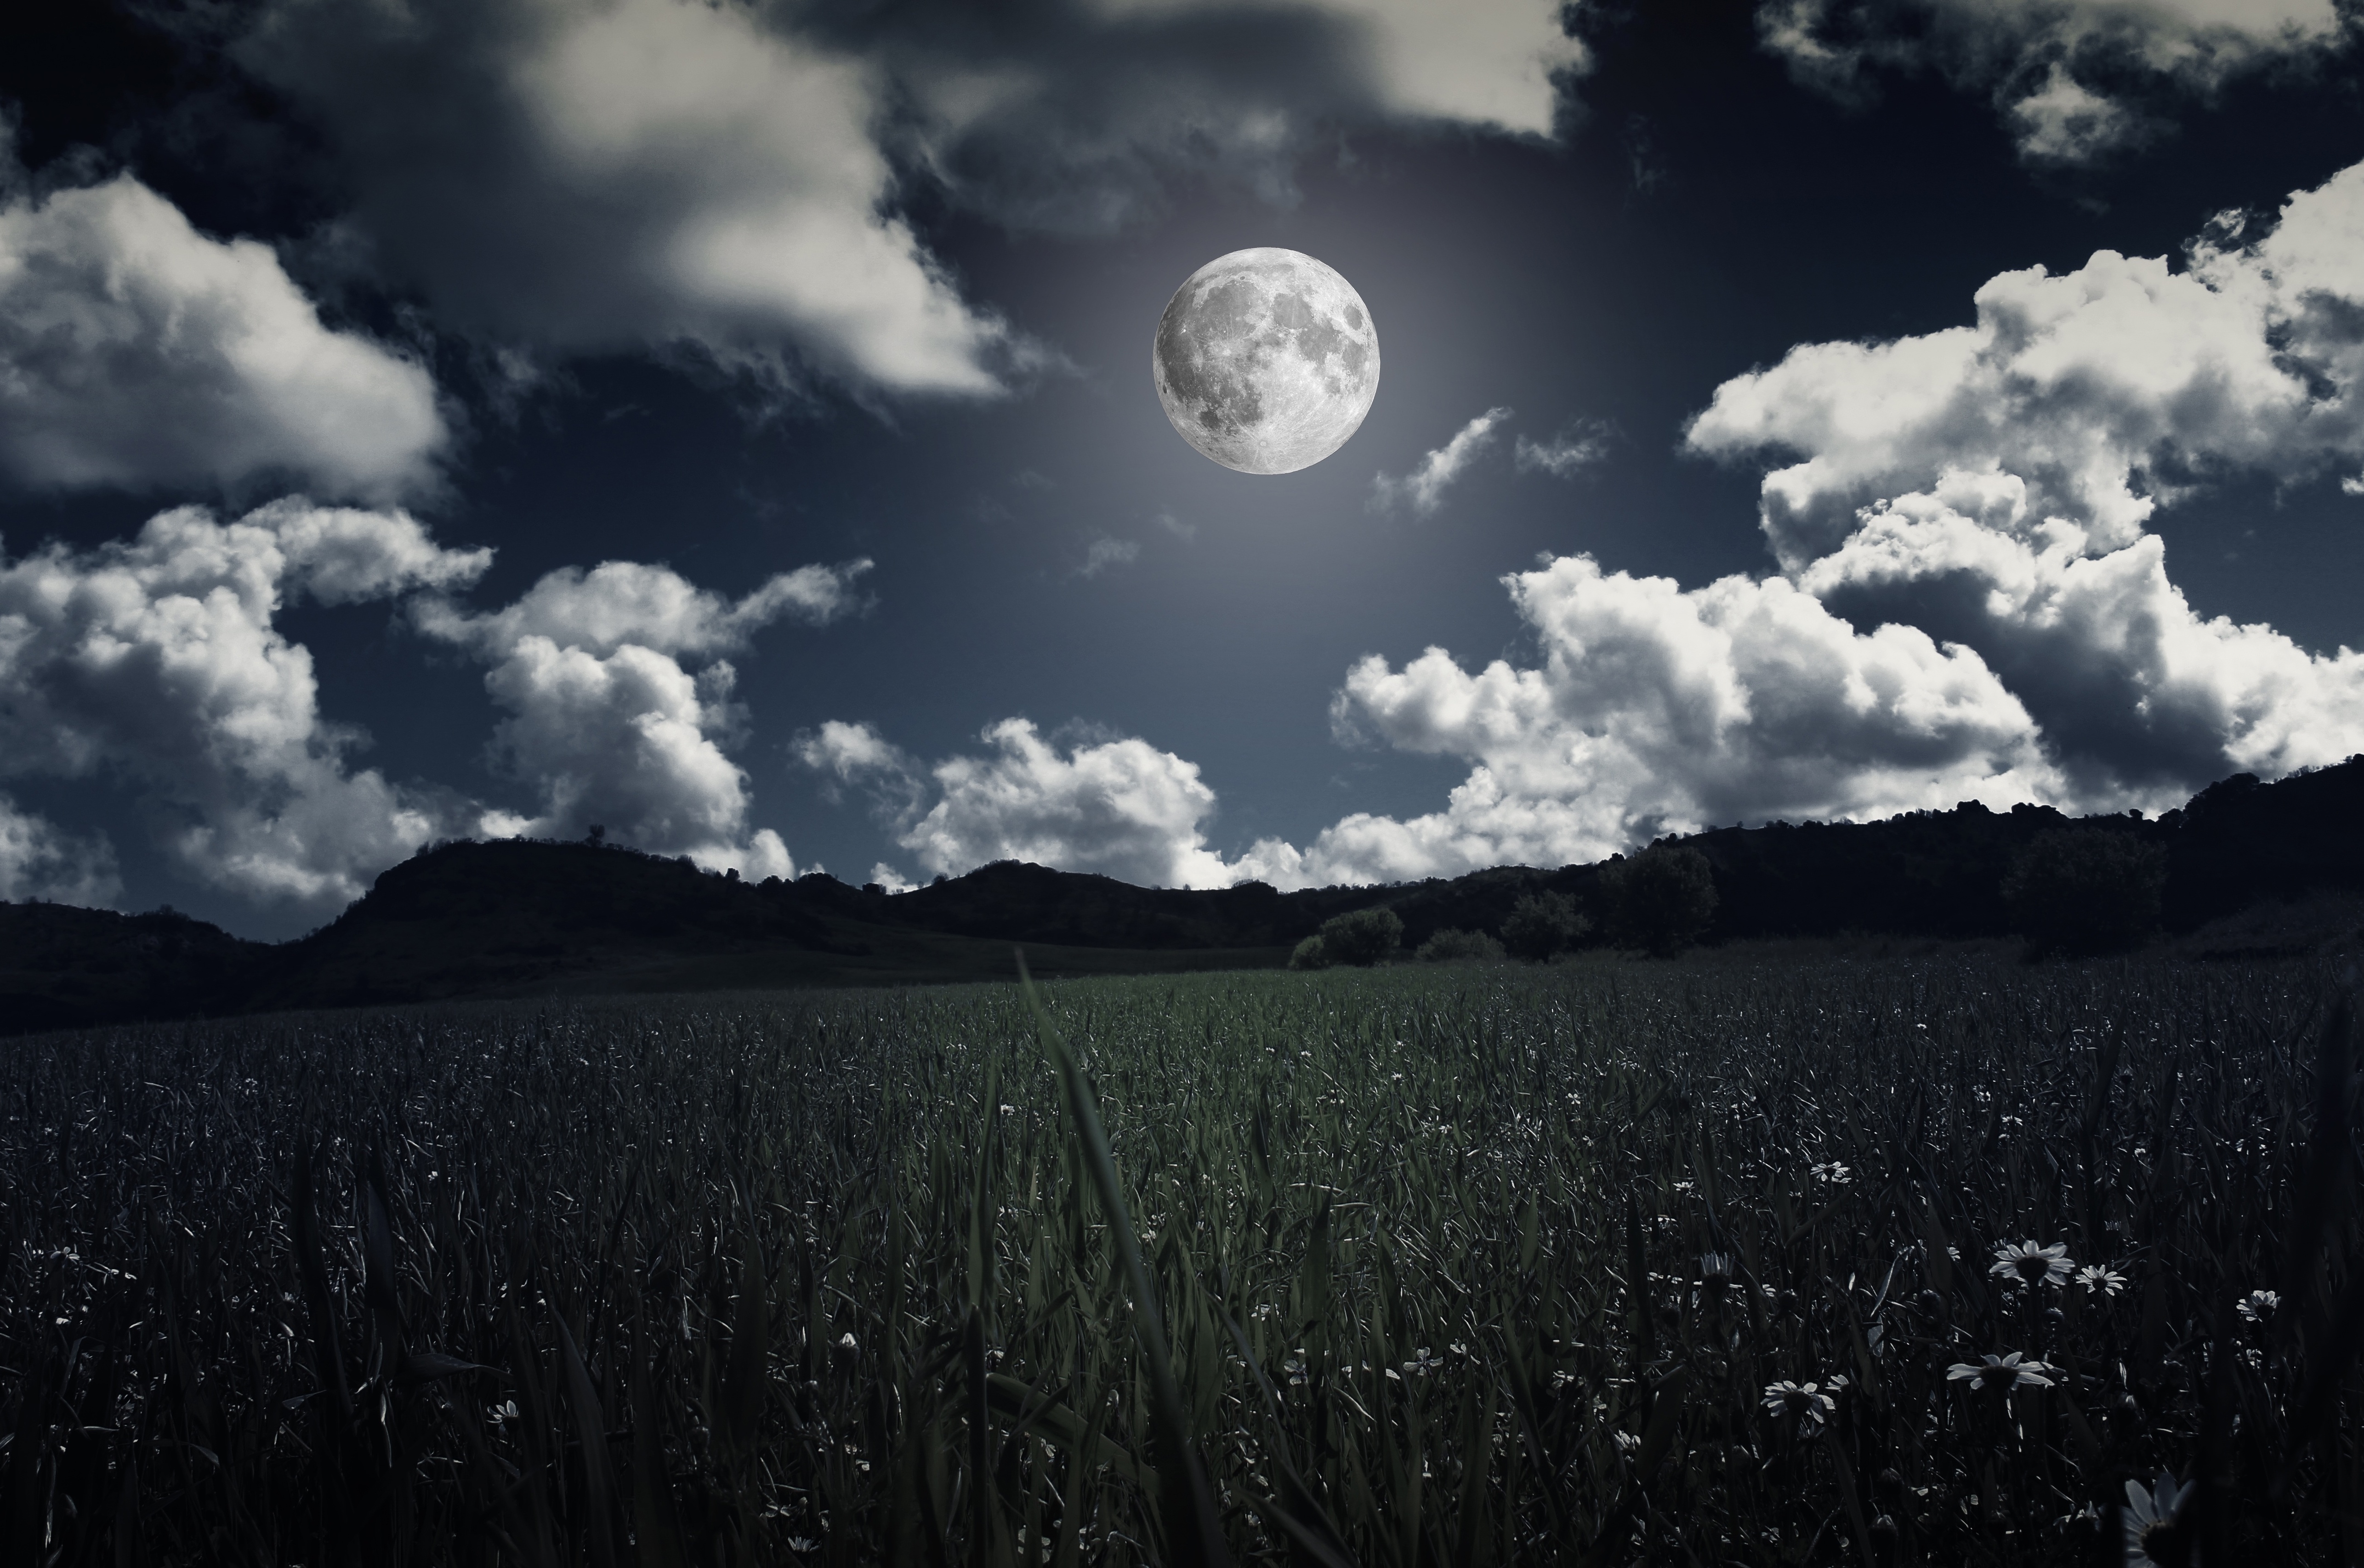 moon, grass, full moon, nature, clouds, field, photoshop